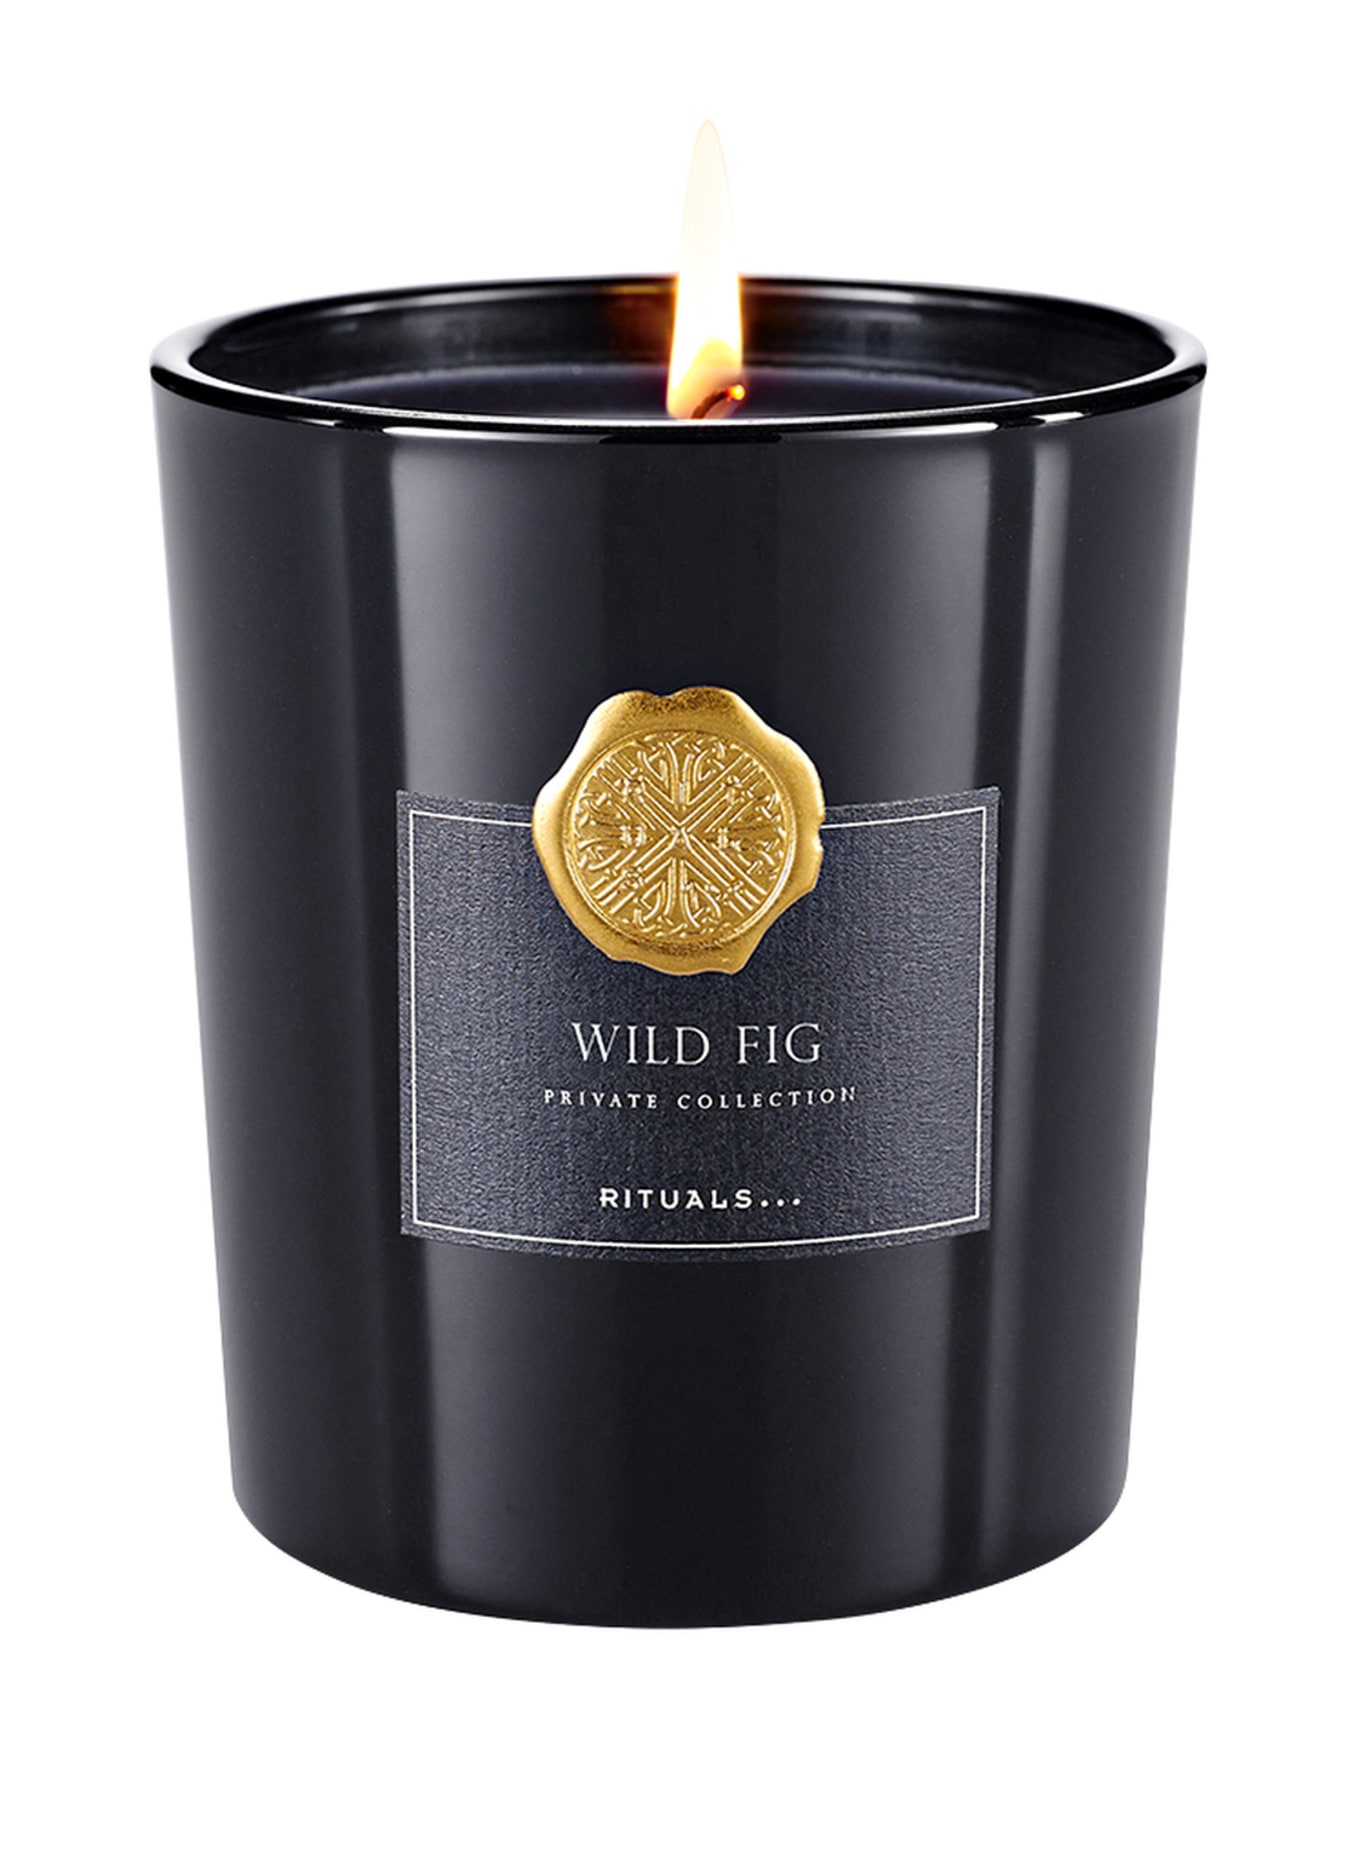 RITUALS WILD FIG SCENTED CANDLE (Obrázek 1)